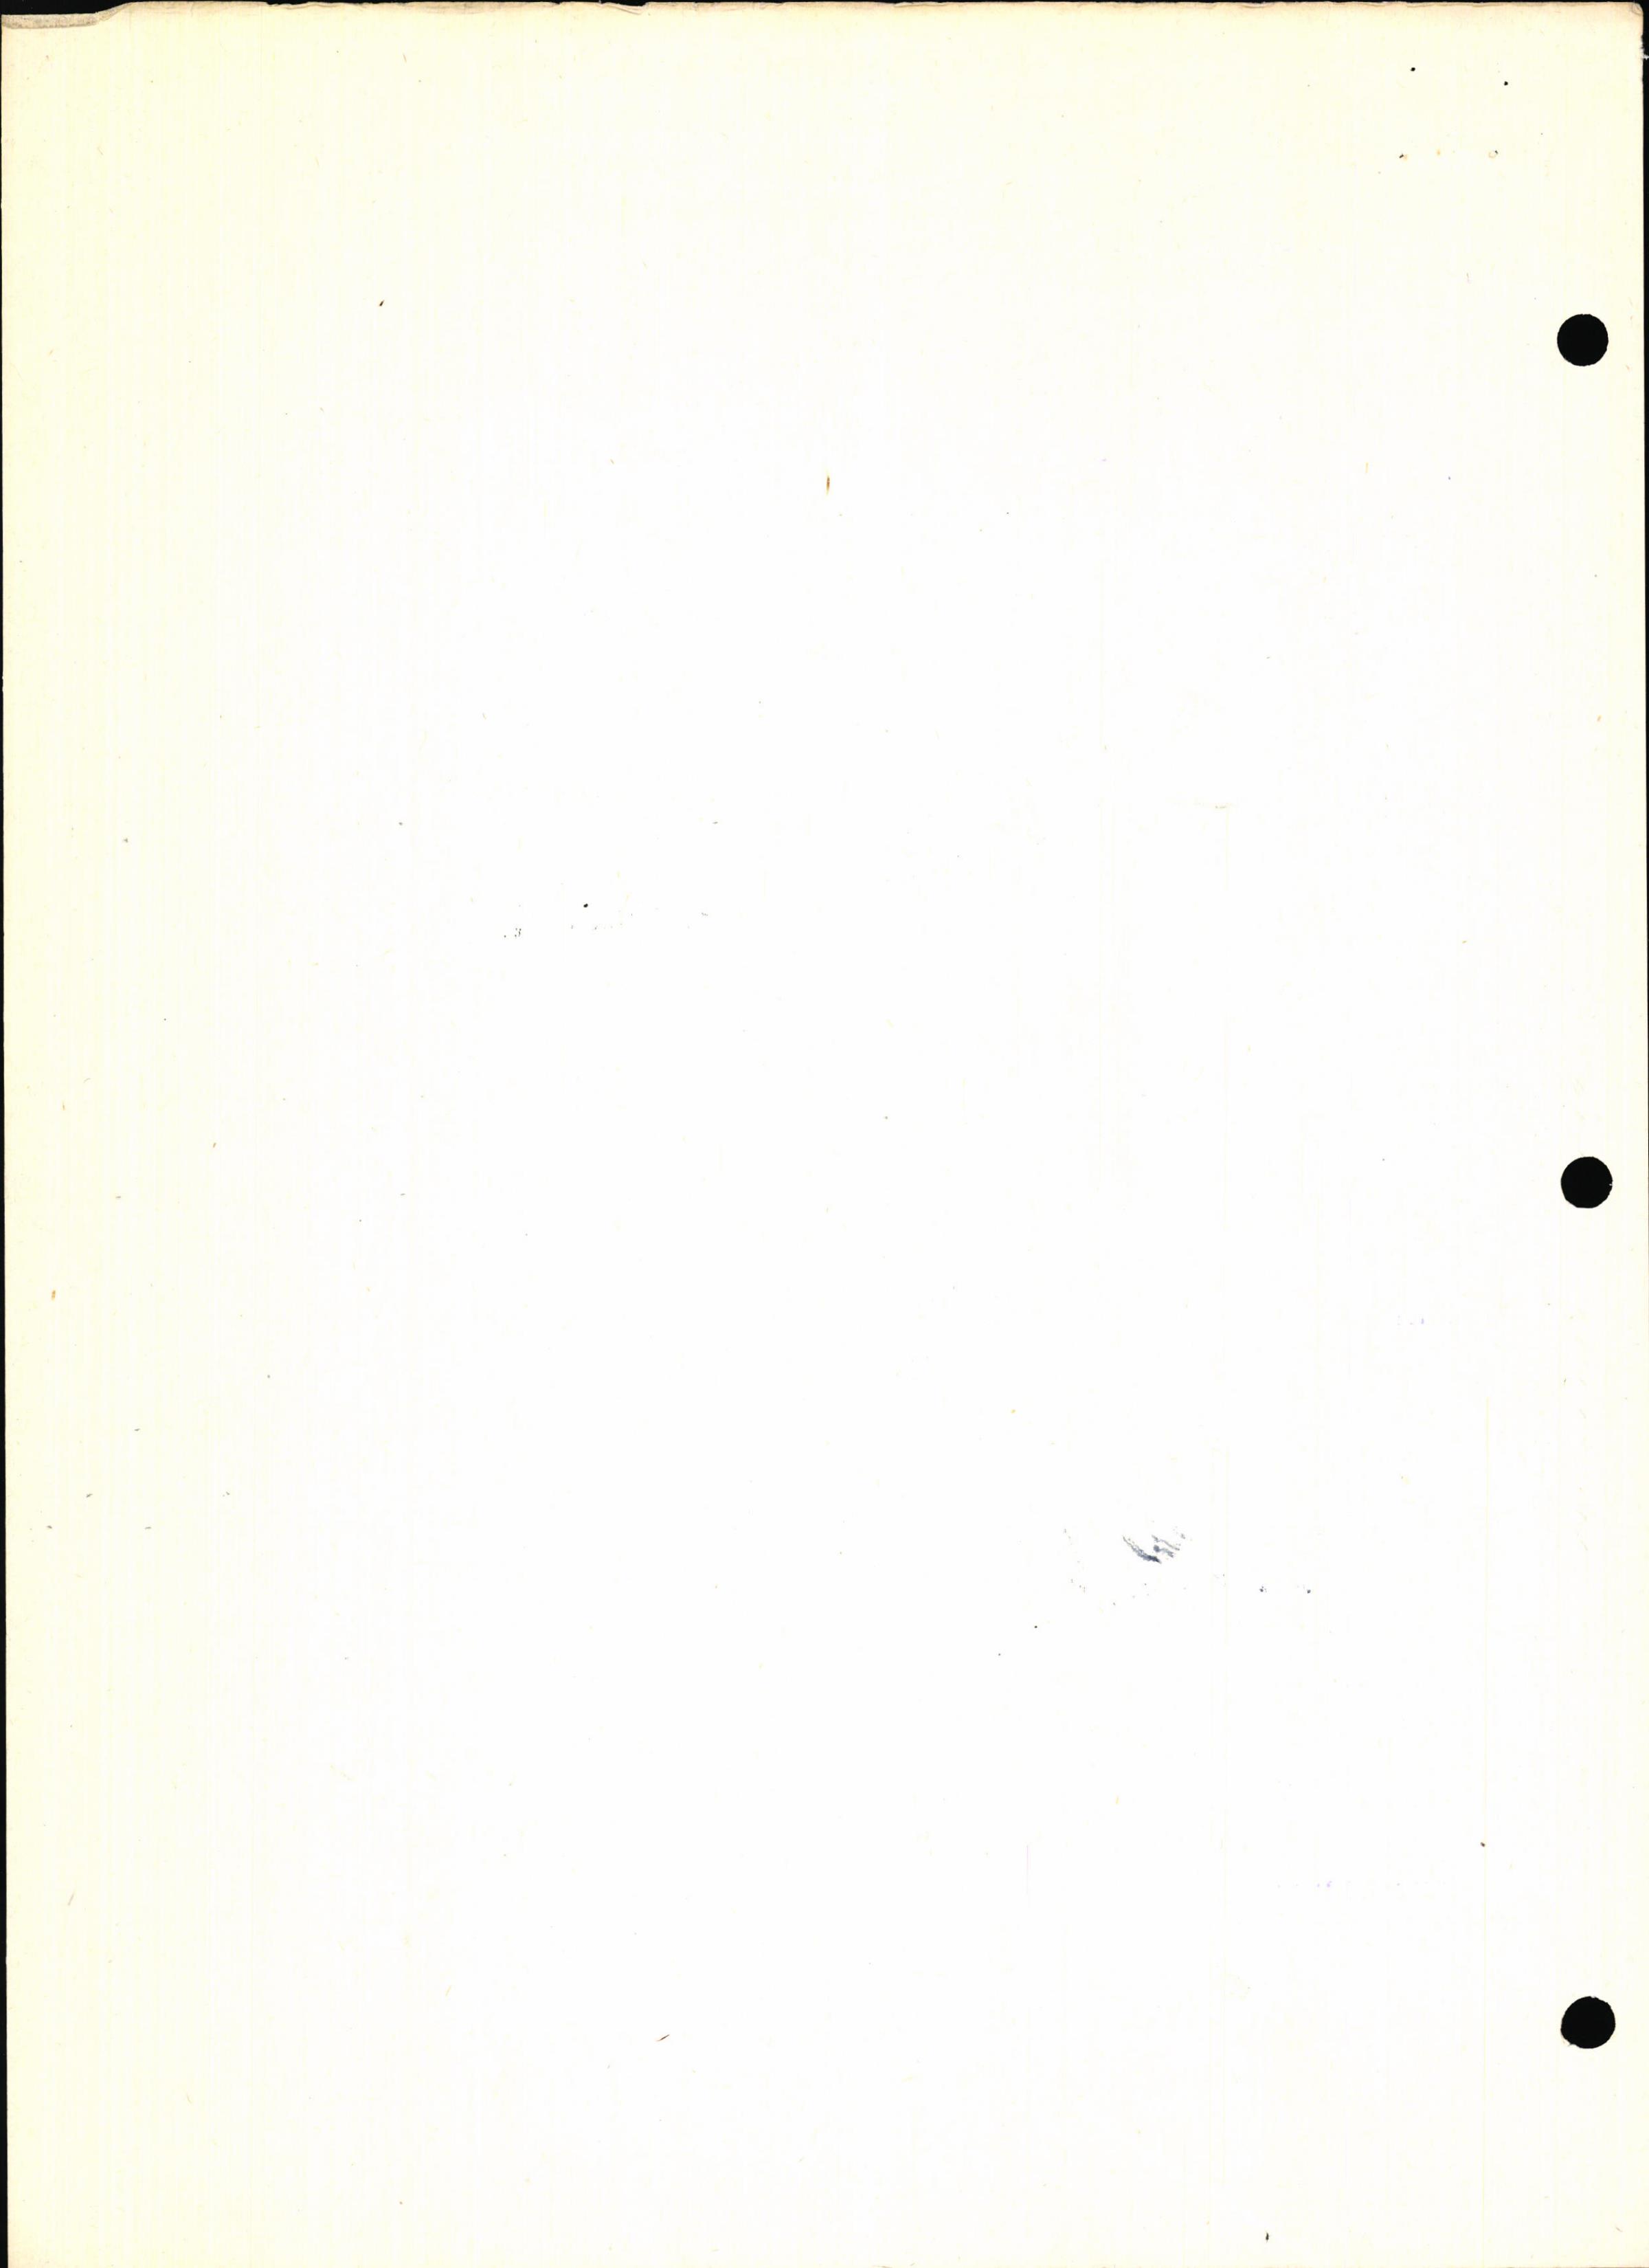 Sample page 6 from AirCorps Library document: Technical Information for Serial Number 1452